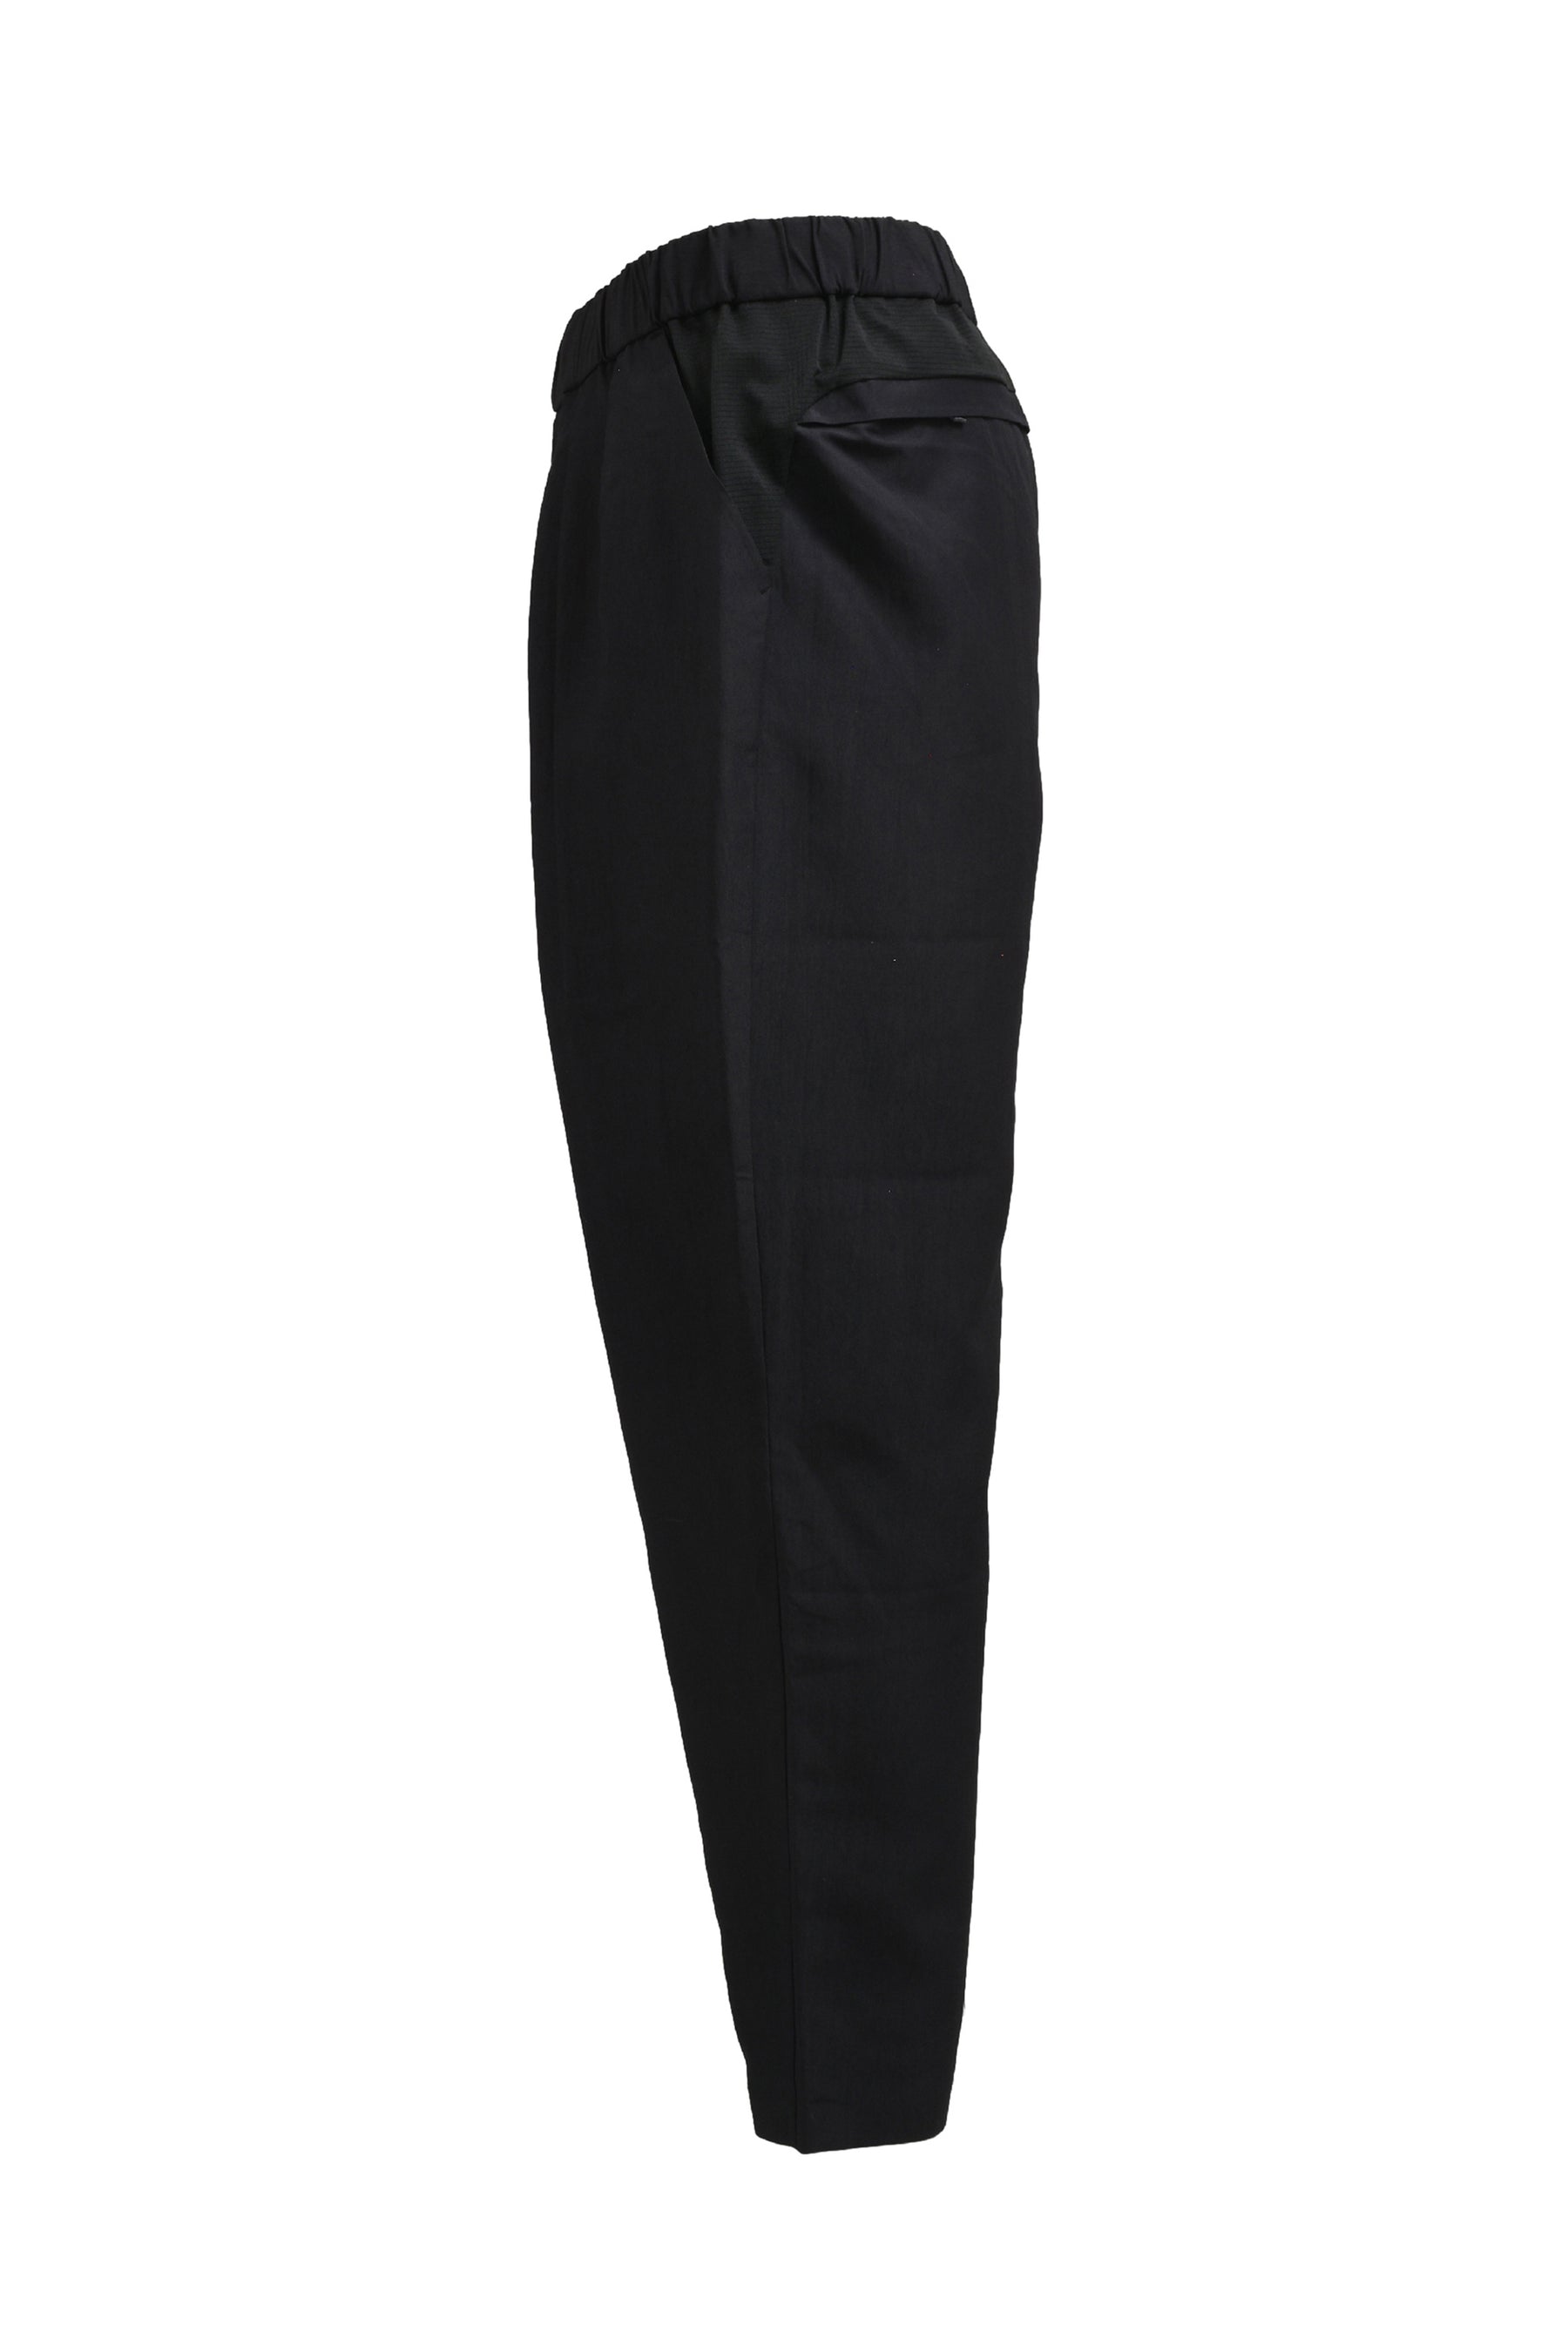 POLYESTER TAFFETA TAPERED EASY PANTS / BLK